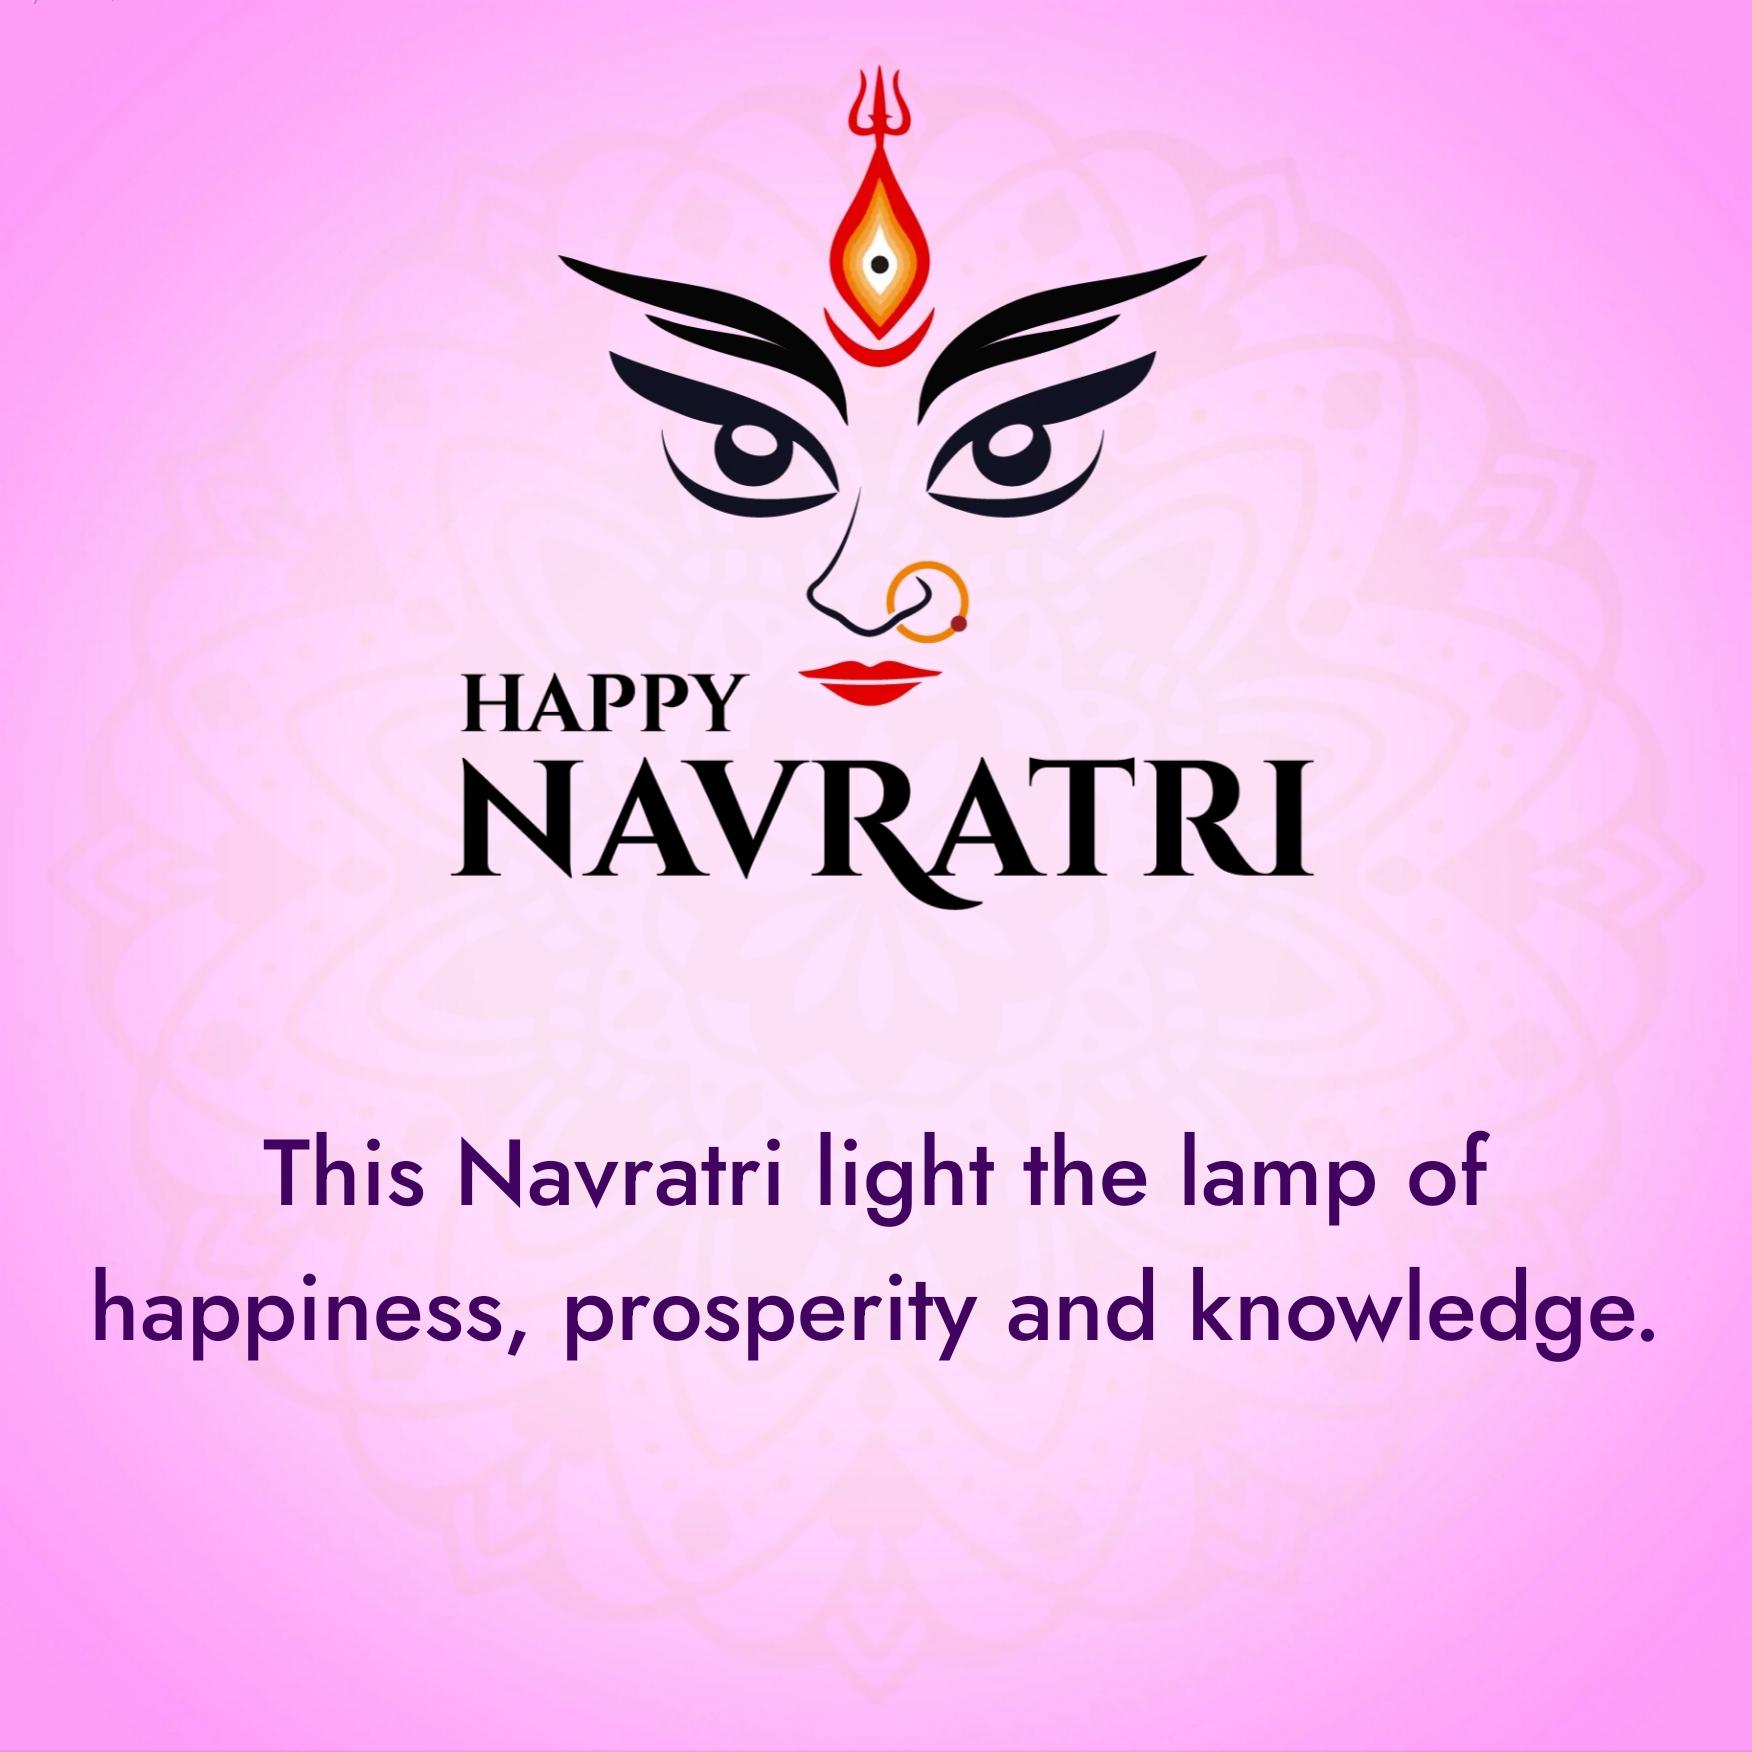 This Navratri light the lamp of happiness prosperity